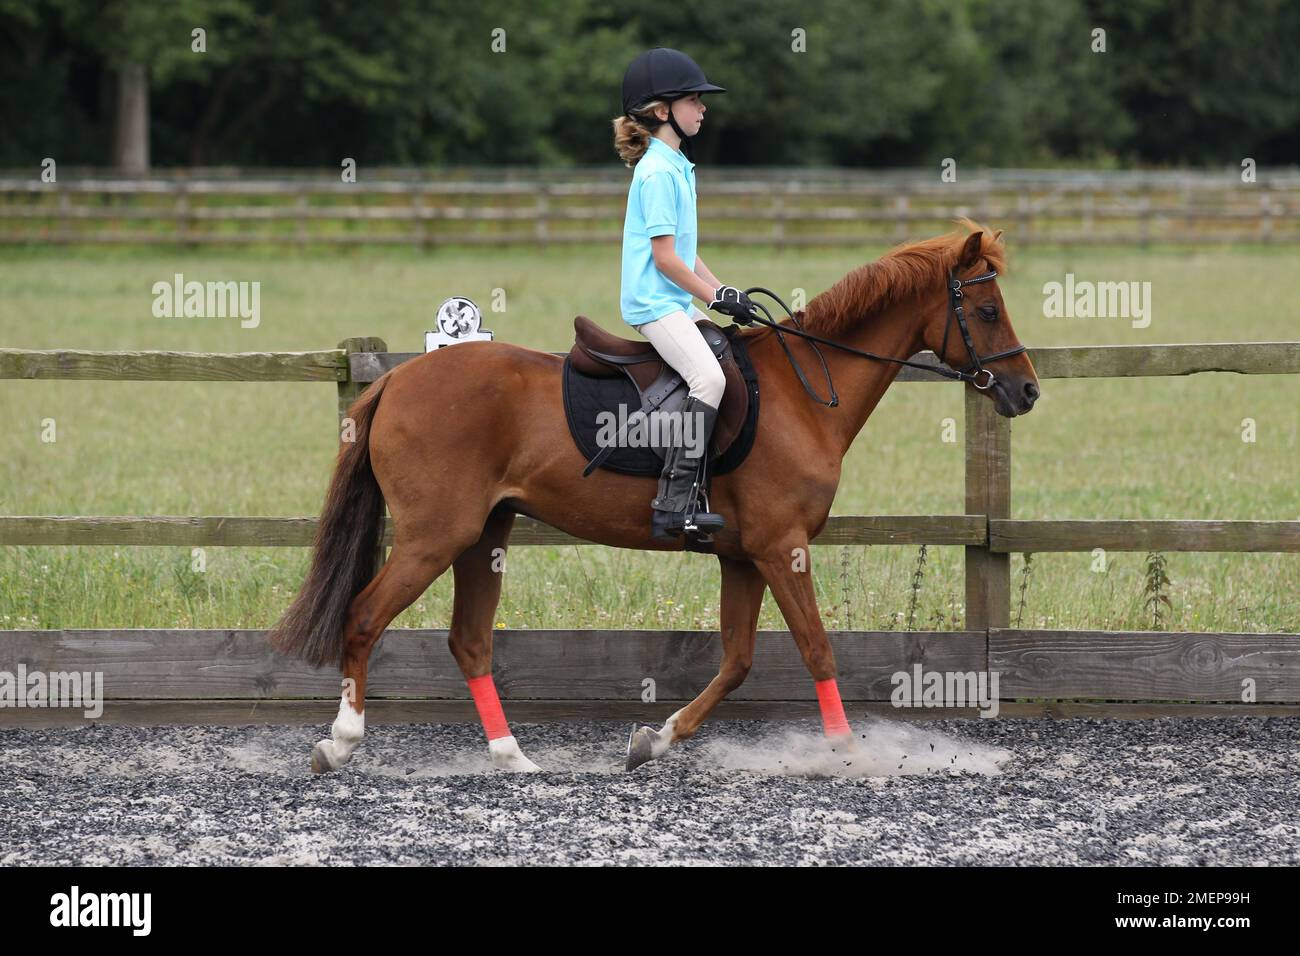 Girl riding pony as it trots in paddock during riding lesson, side view Stock Photo